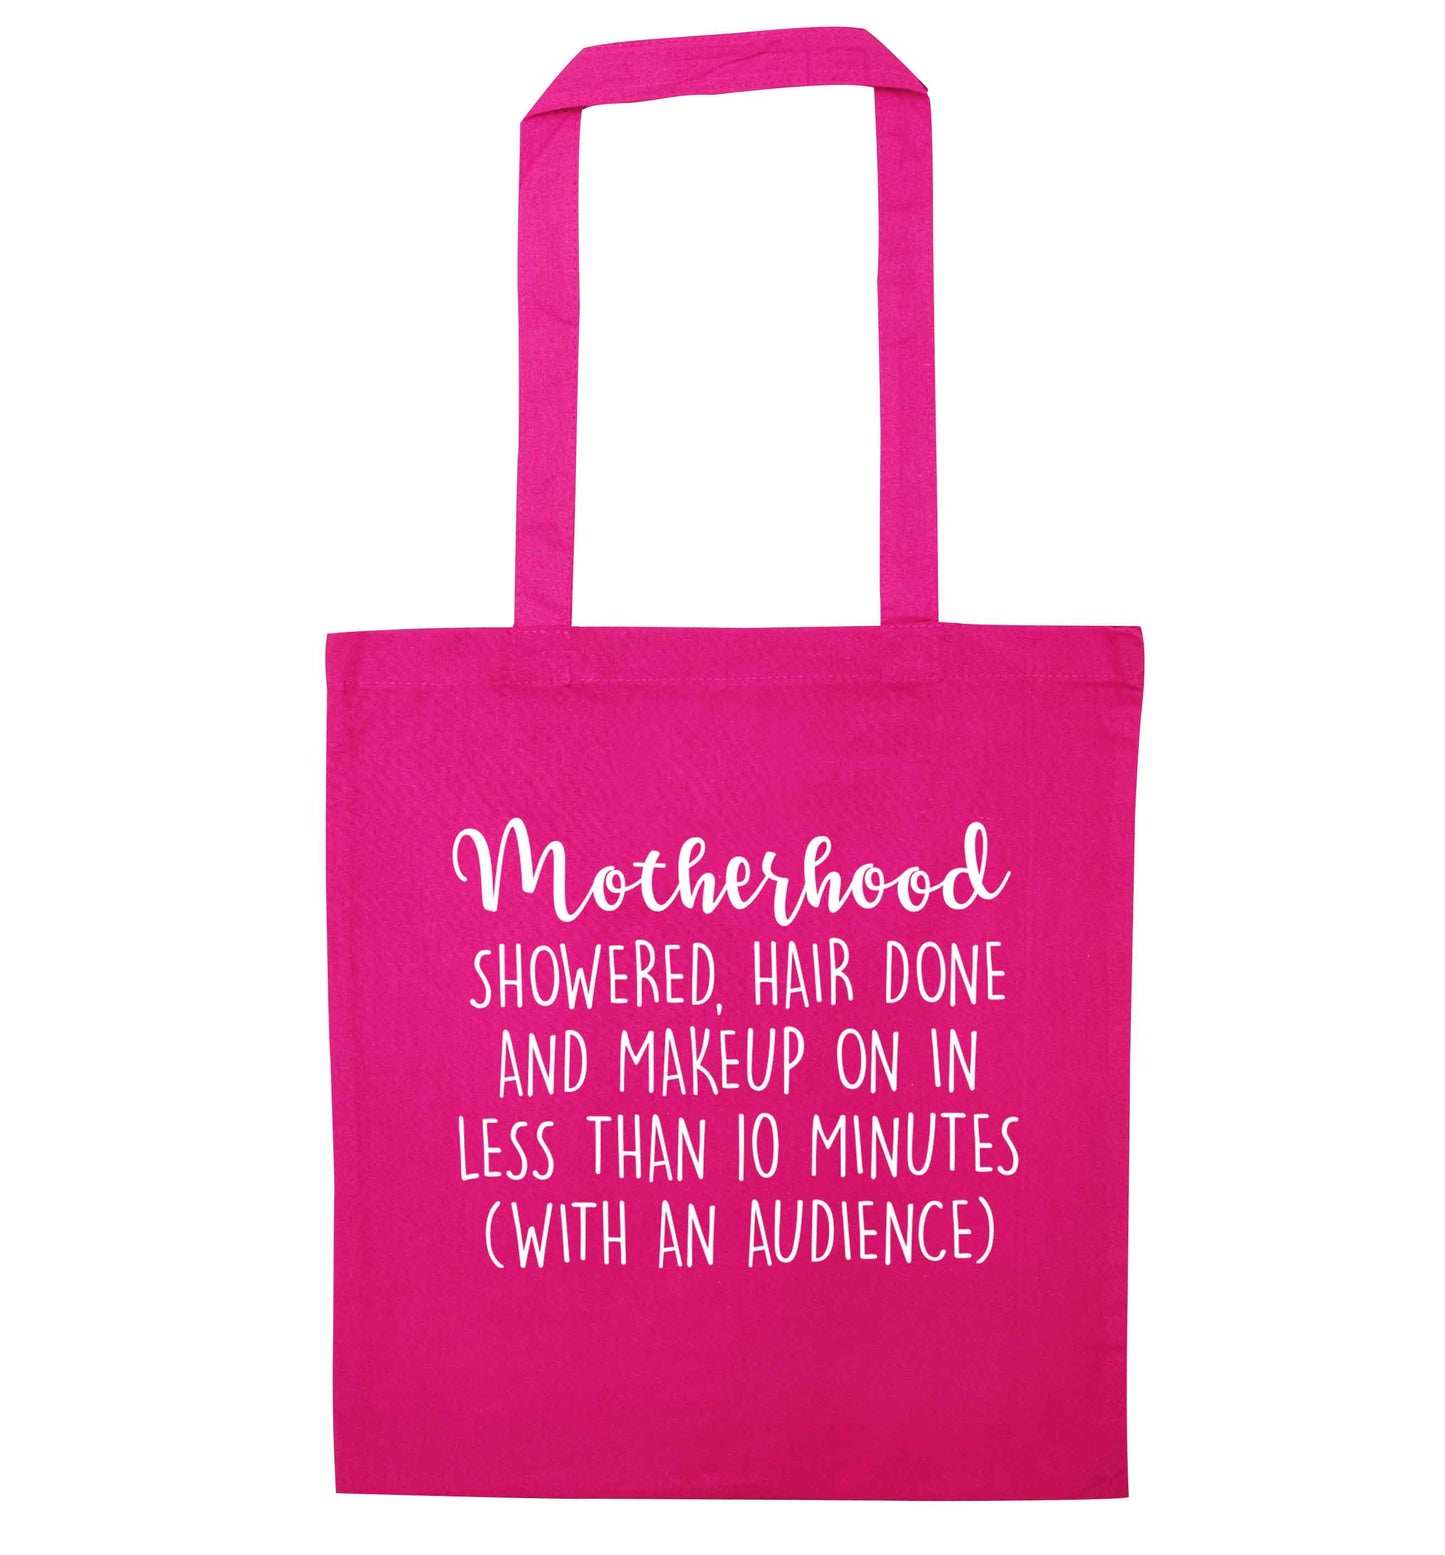 Motherhood, showered, hair done and makeup on pink tote bag